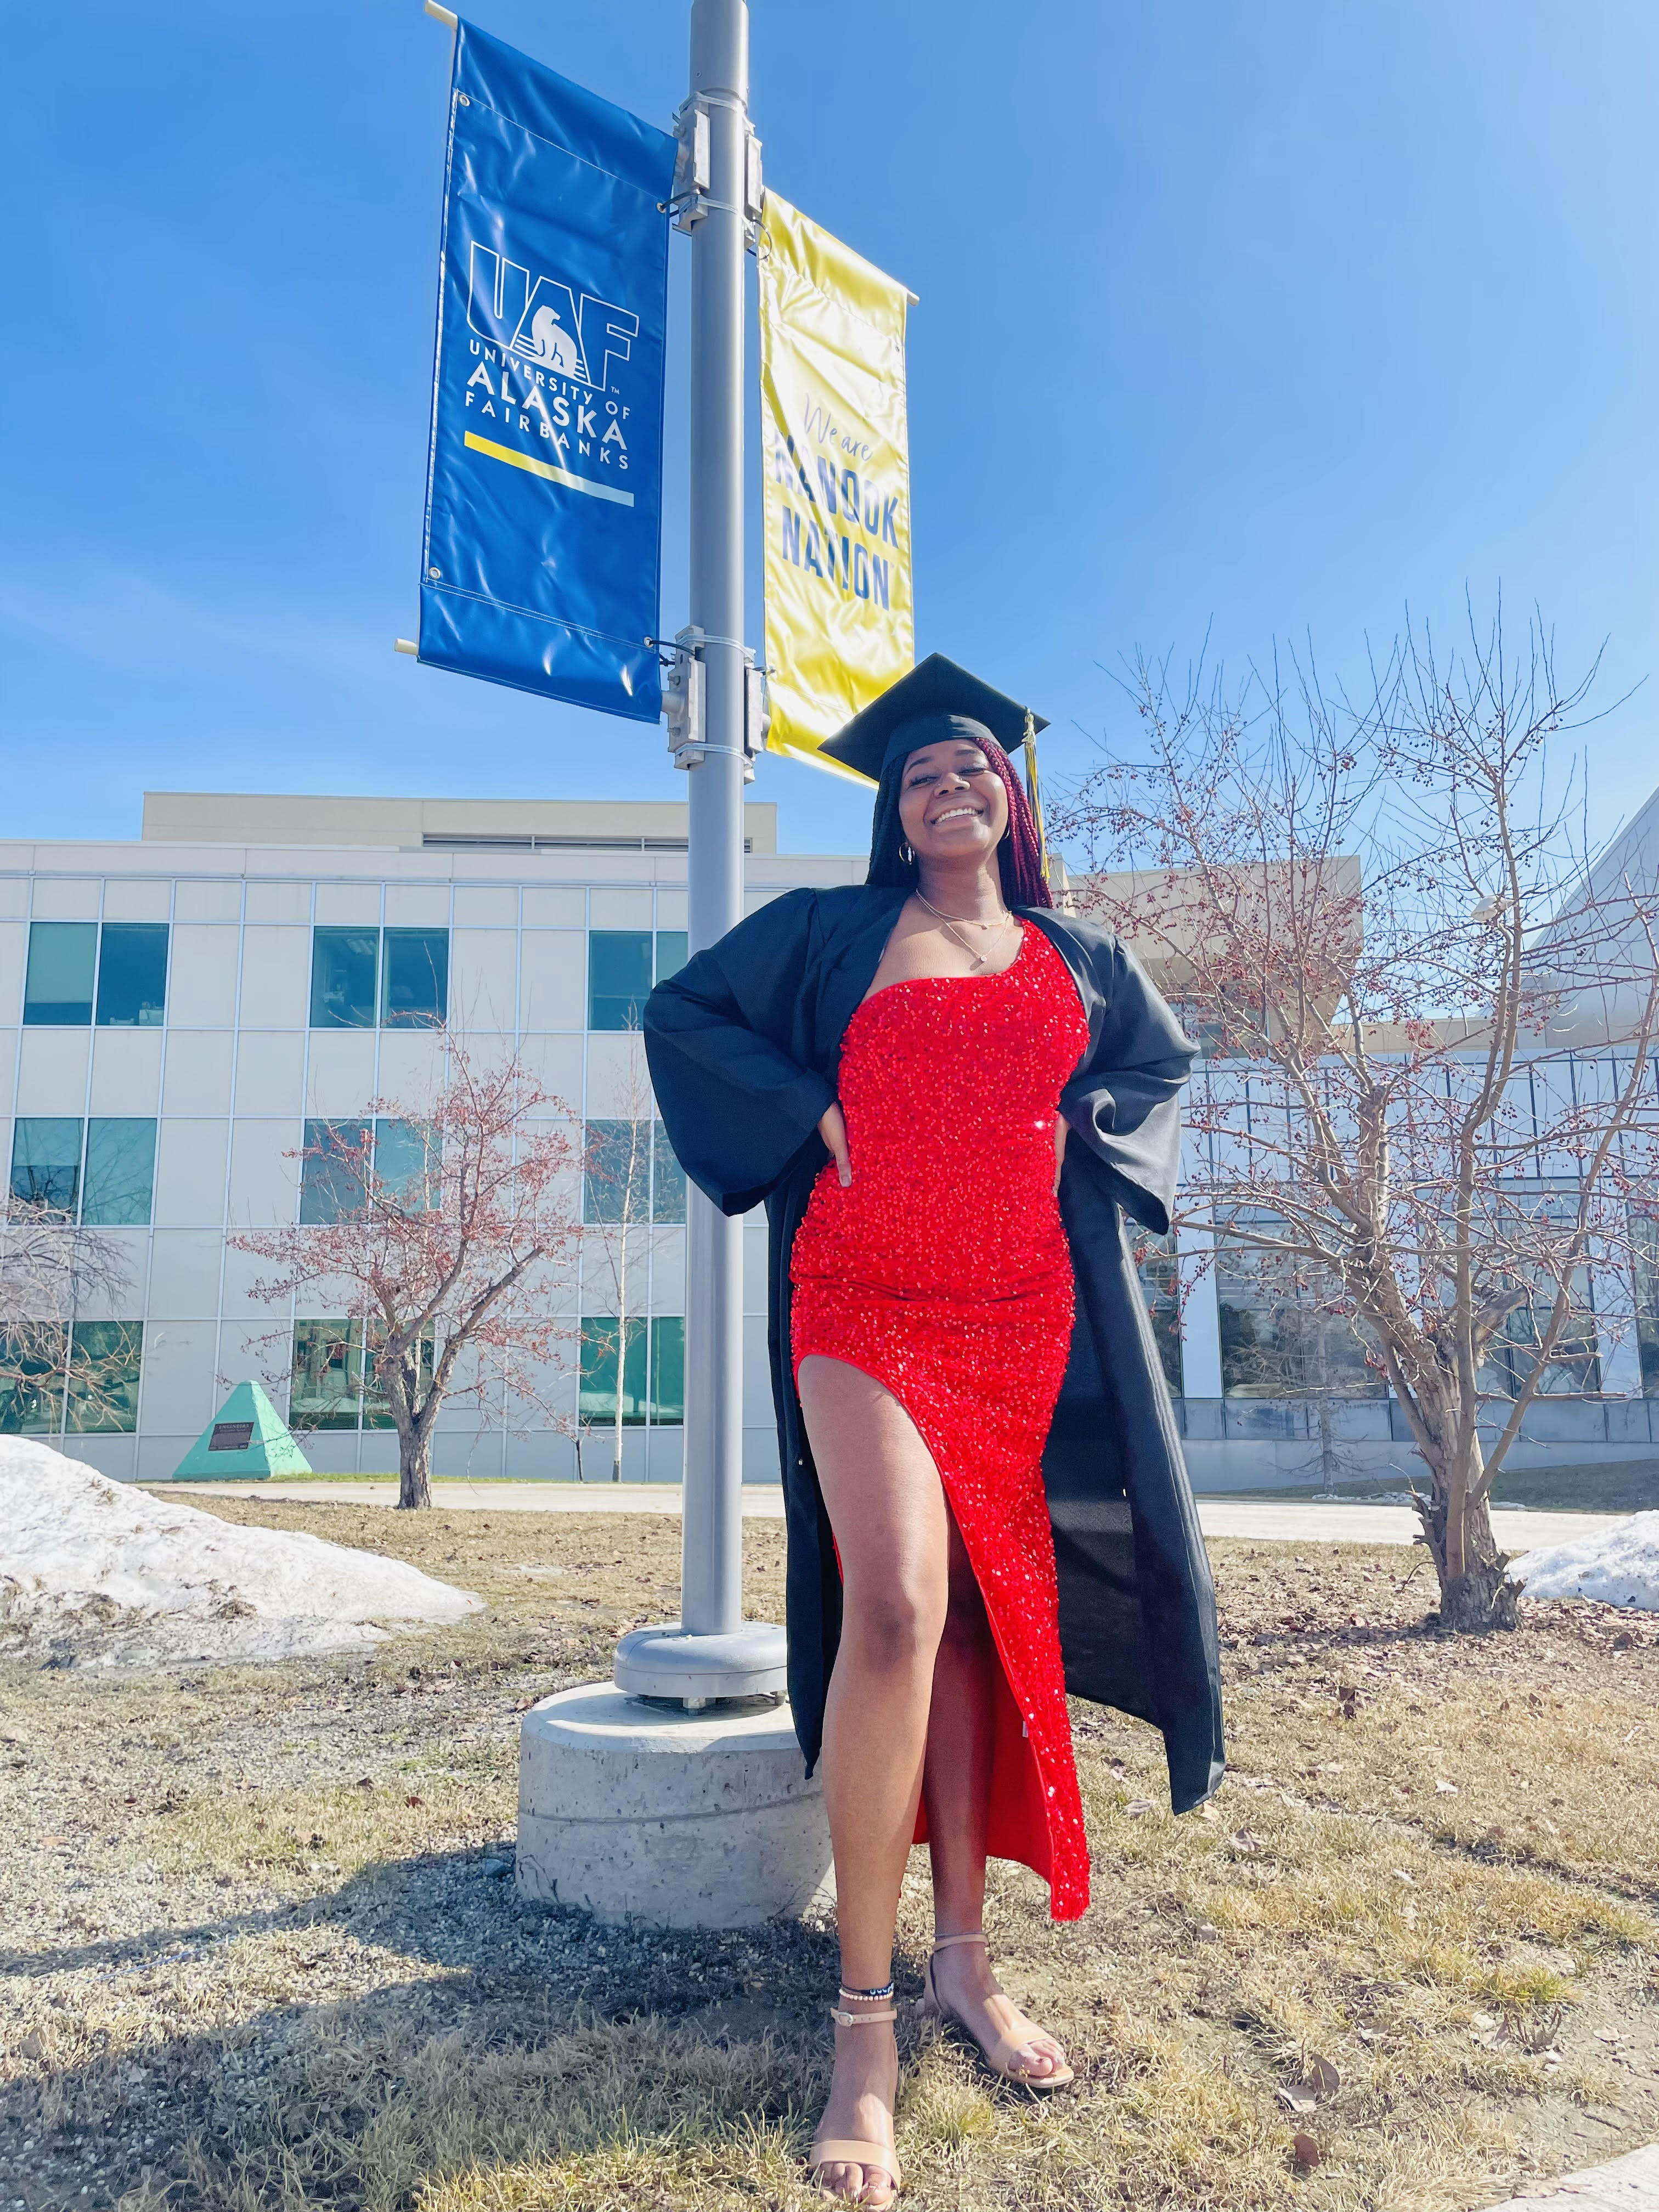 Jessica Egbejimba, a research assistant at ACEP, celebrated her graduation from UAF in May. Photo by Cariane Gonzalez.  Jessica Egbejimba, a research assistant at ACEP, celebrated her graduation from UAF in May. Photo by Cariane Gonzalez.  described by the caption and credit below image